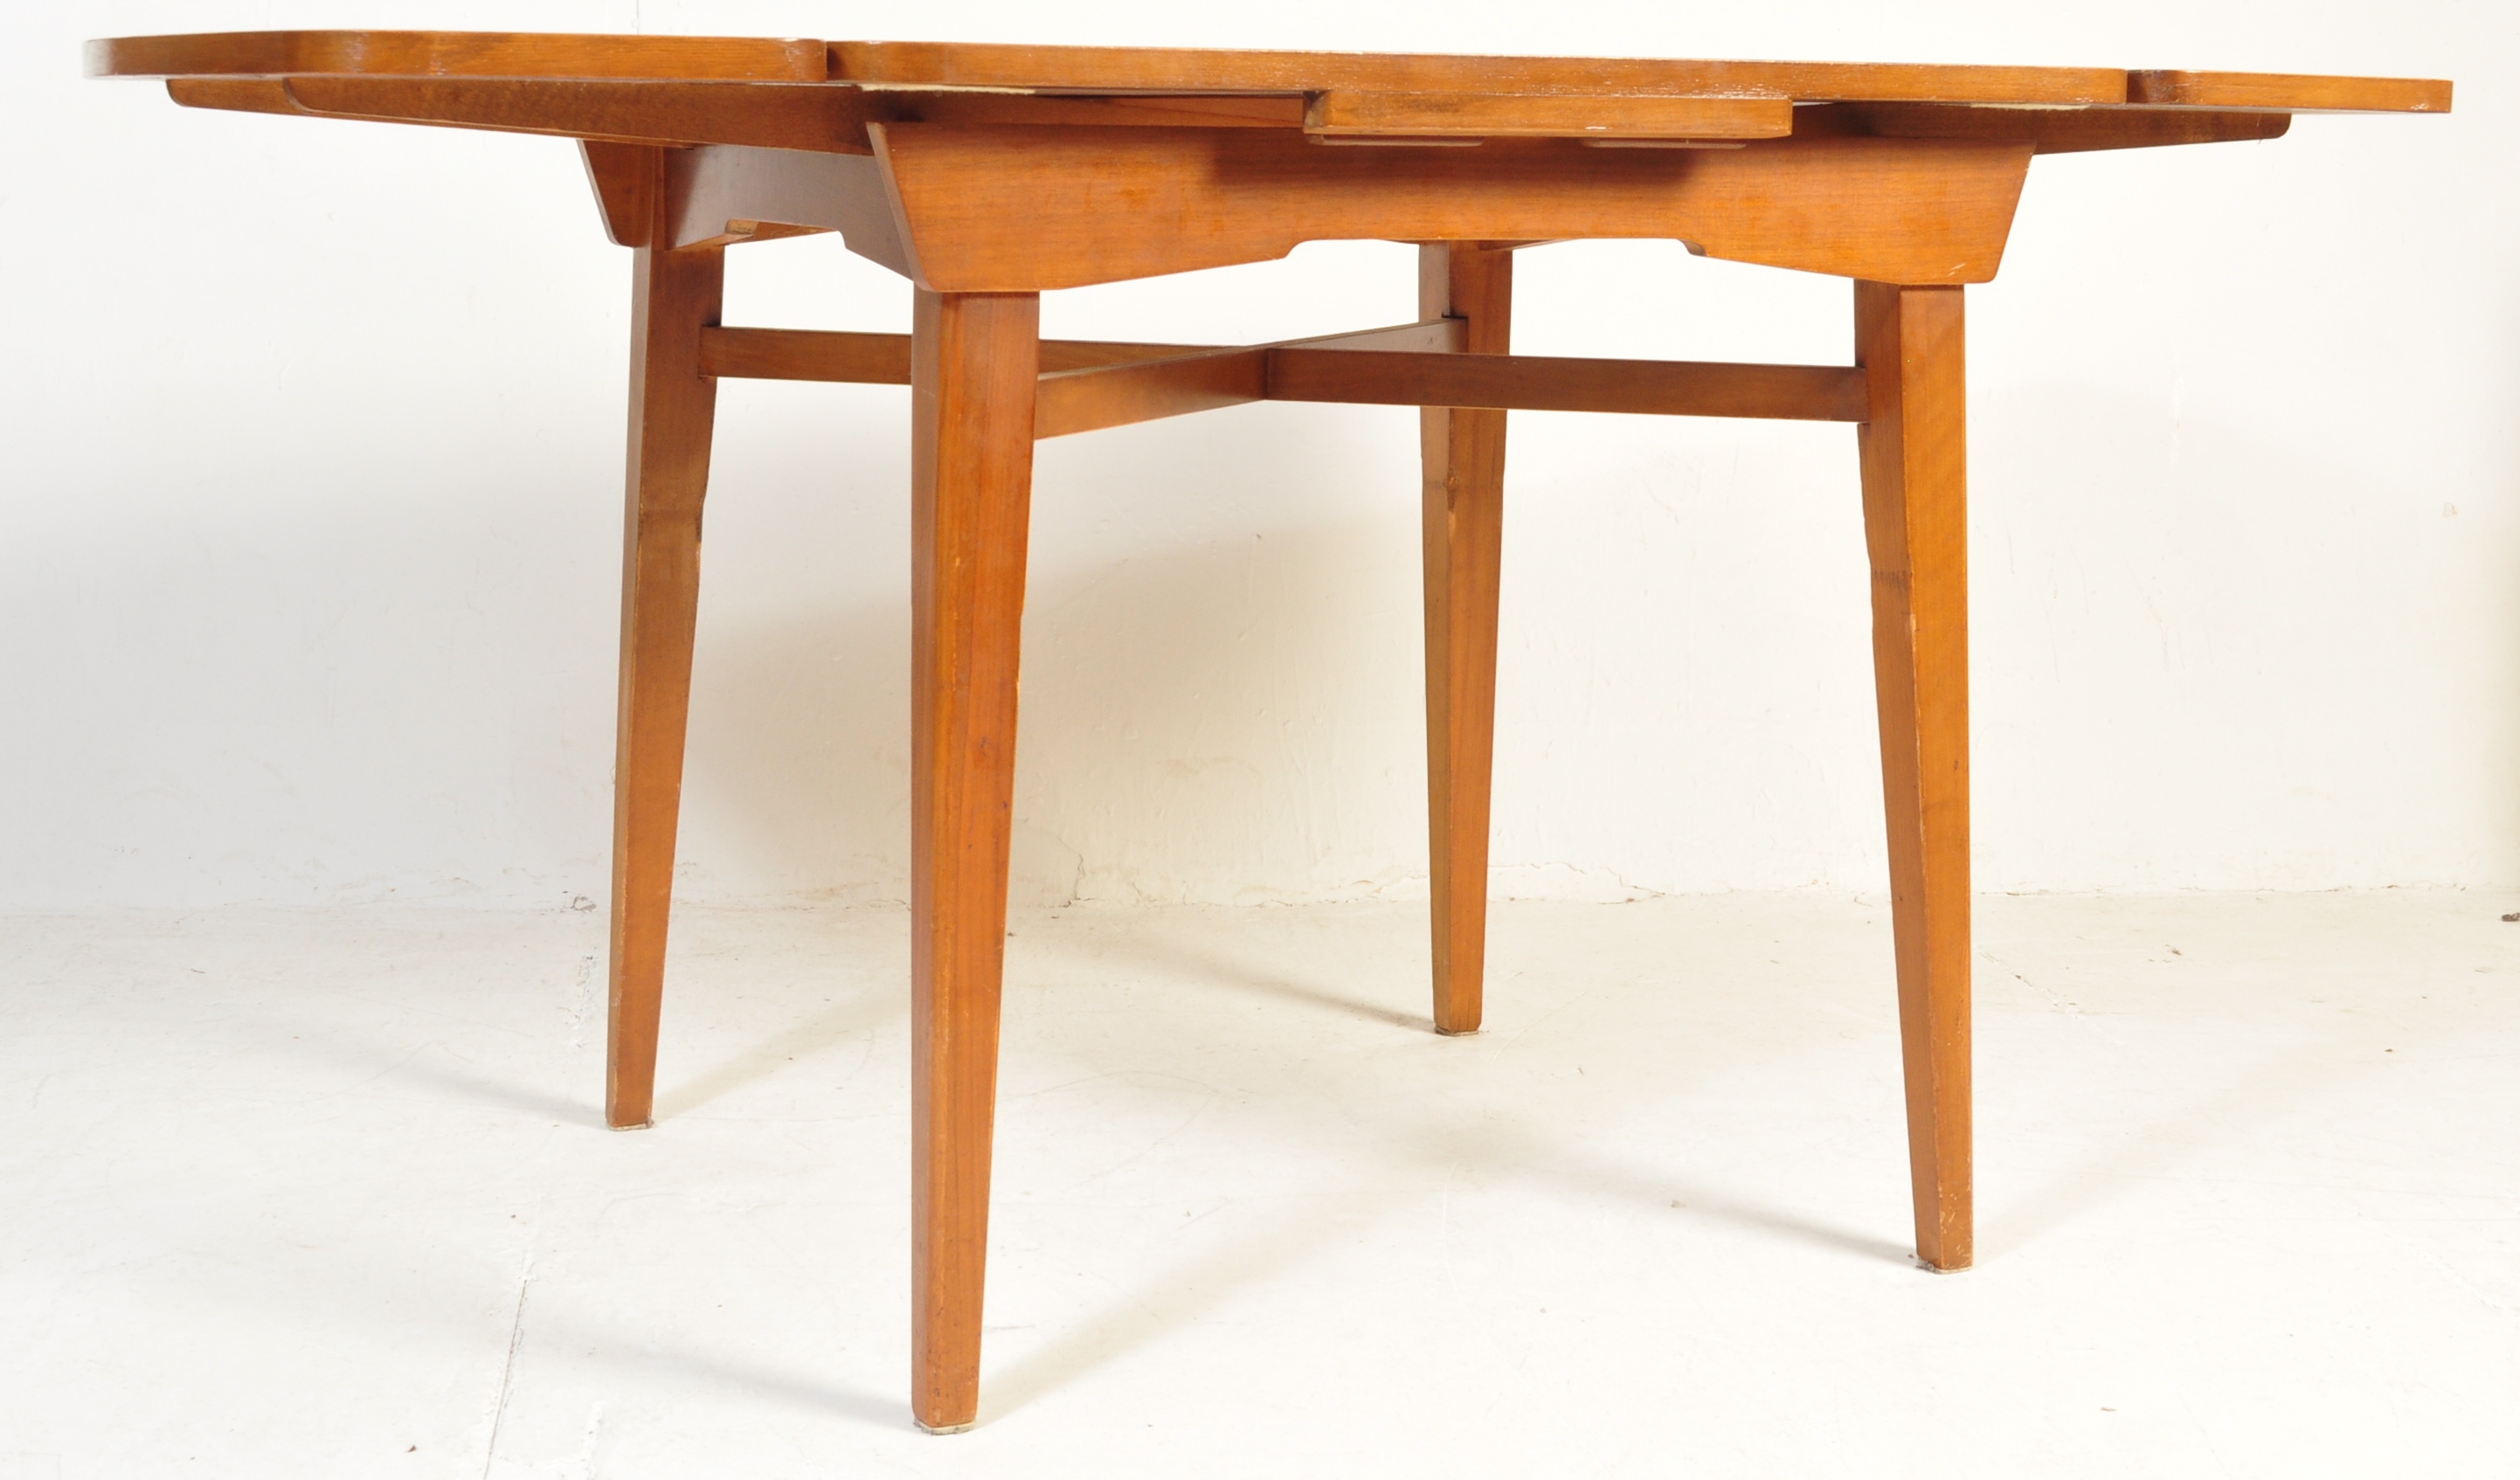 PARKER KNOLL TEAK EXTENDABLE DINING TABLE AND CHAIRS - Image 5 of 14